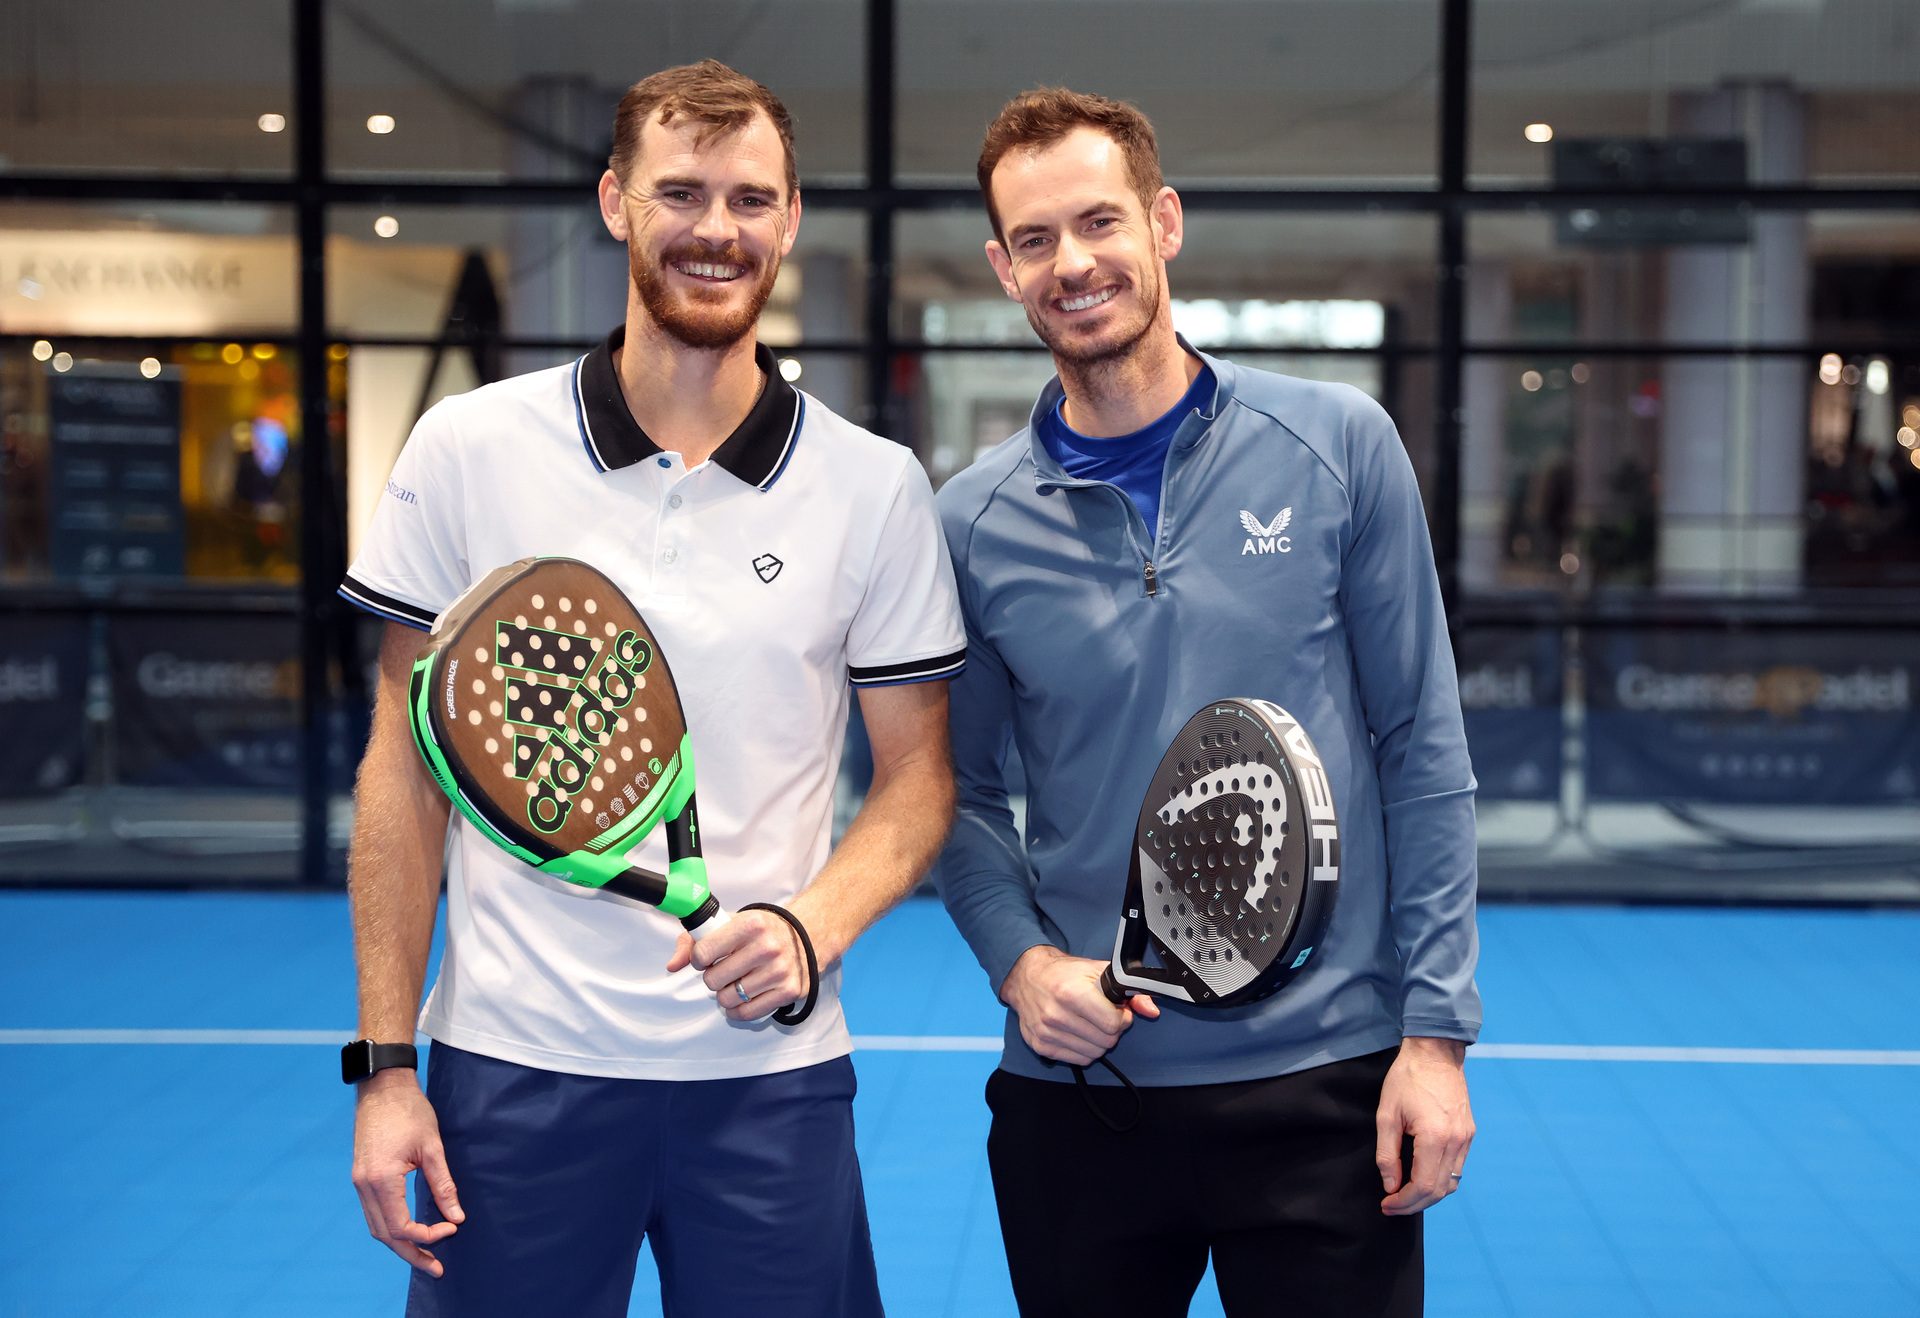 Andy Murray and Jamie Murray play Padel at the Game4Padel pop-up event in London.